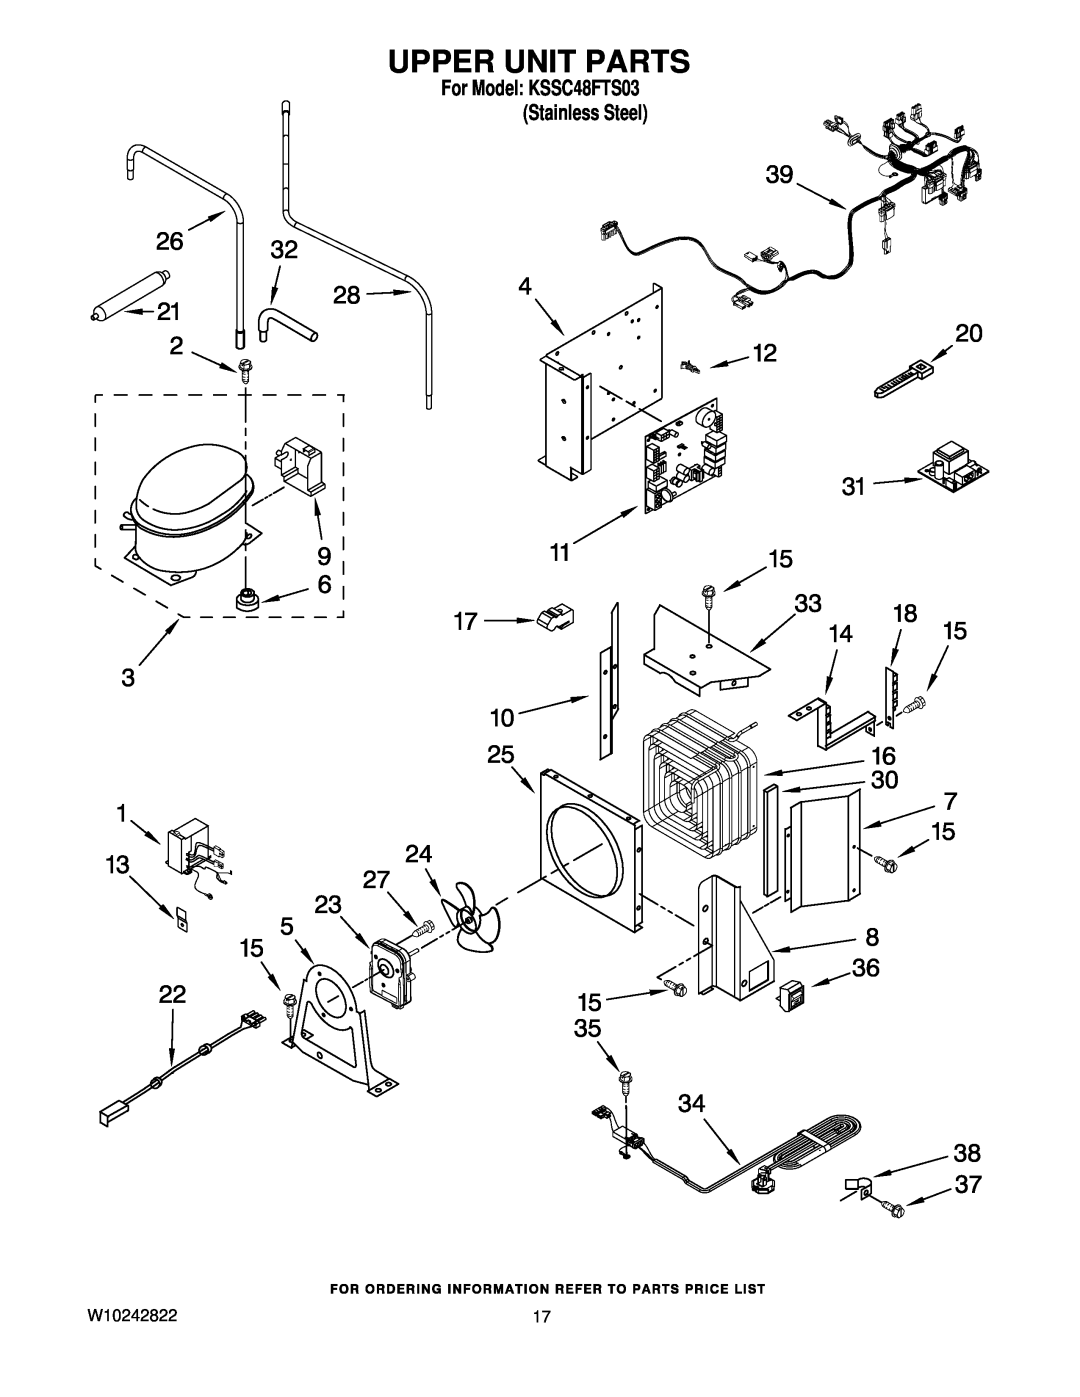 KitchenAid manual Upper Unit Parts, W10242822, For Model KSSC48FTS03 Stainless Steel 